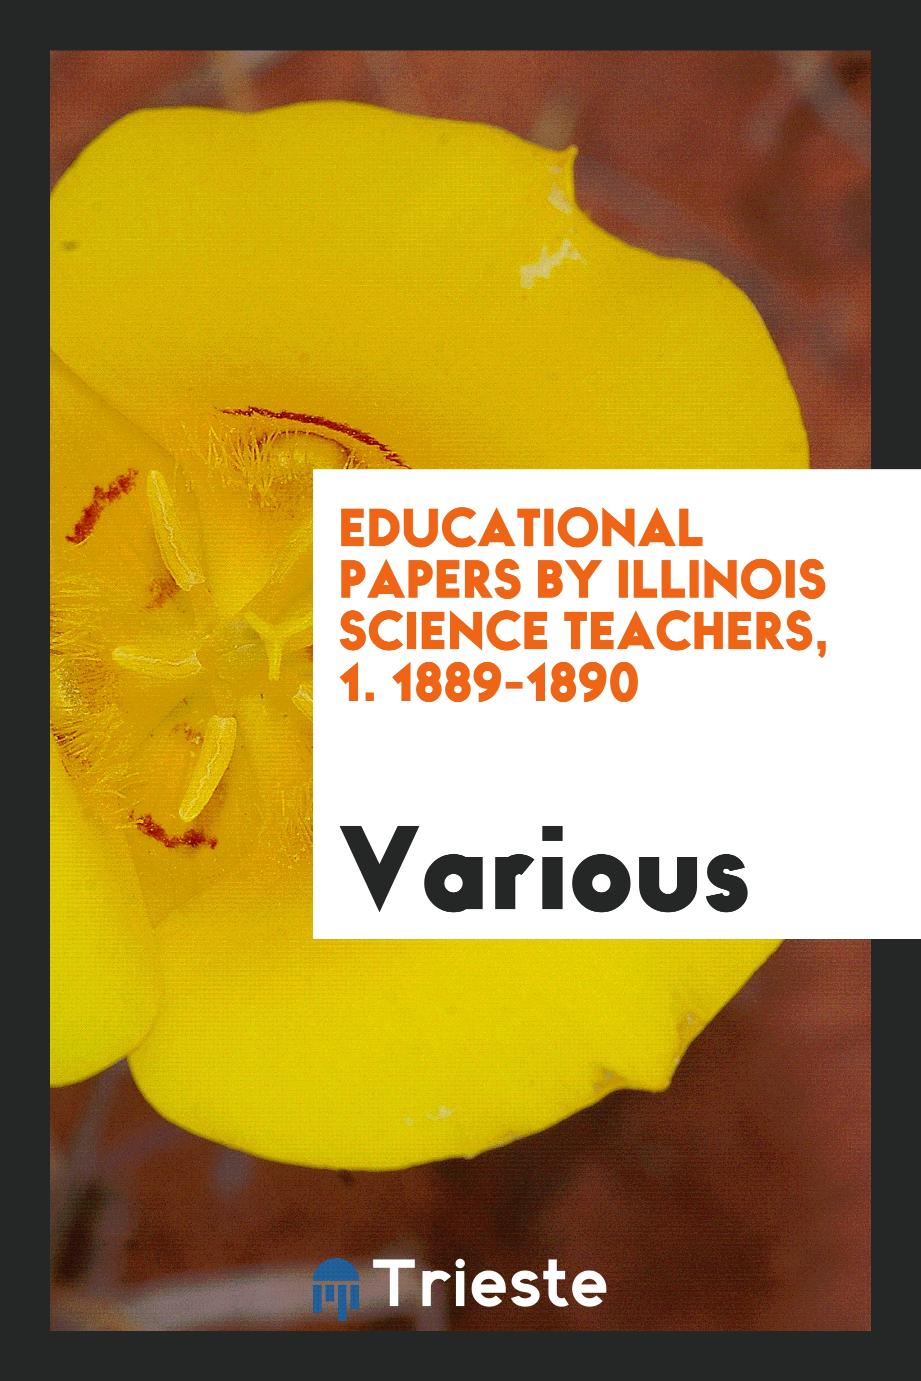 Educational Papers by illinois science teachers, 1. 1889-1890